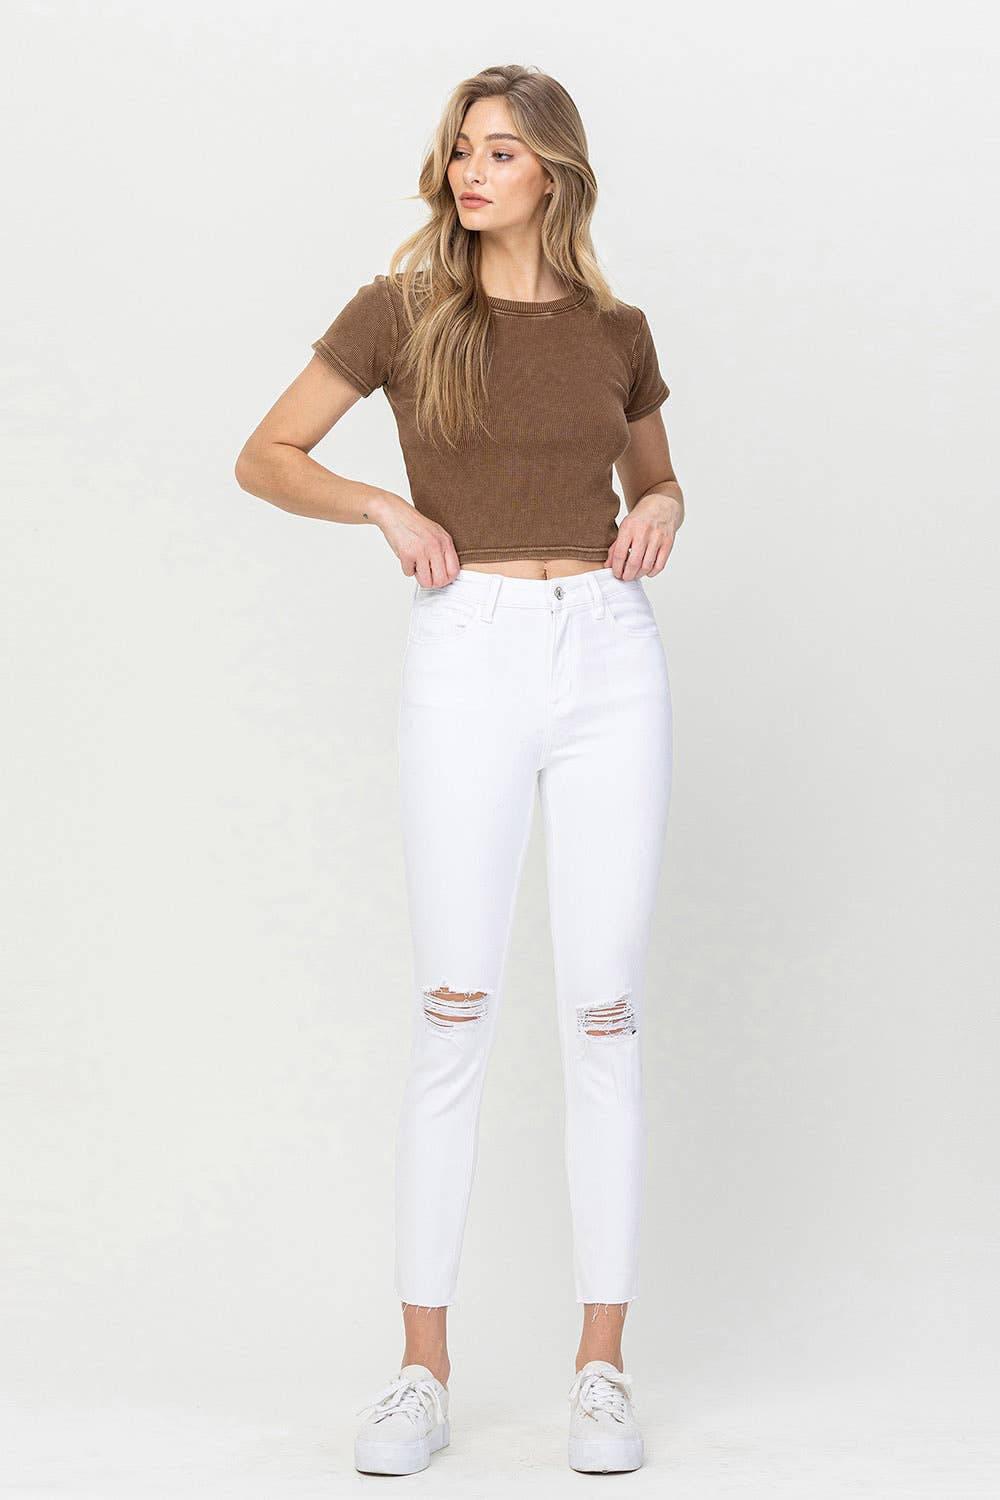 White High Rise Crop Skinny Jeans - Strawberry Moon Boutique